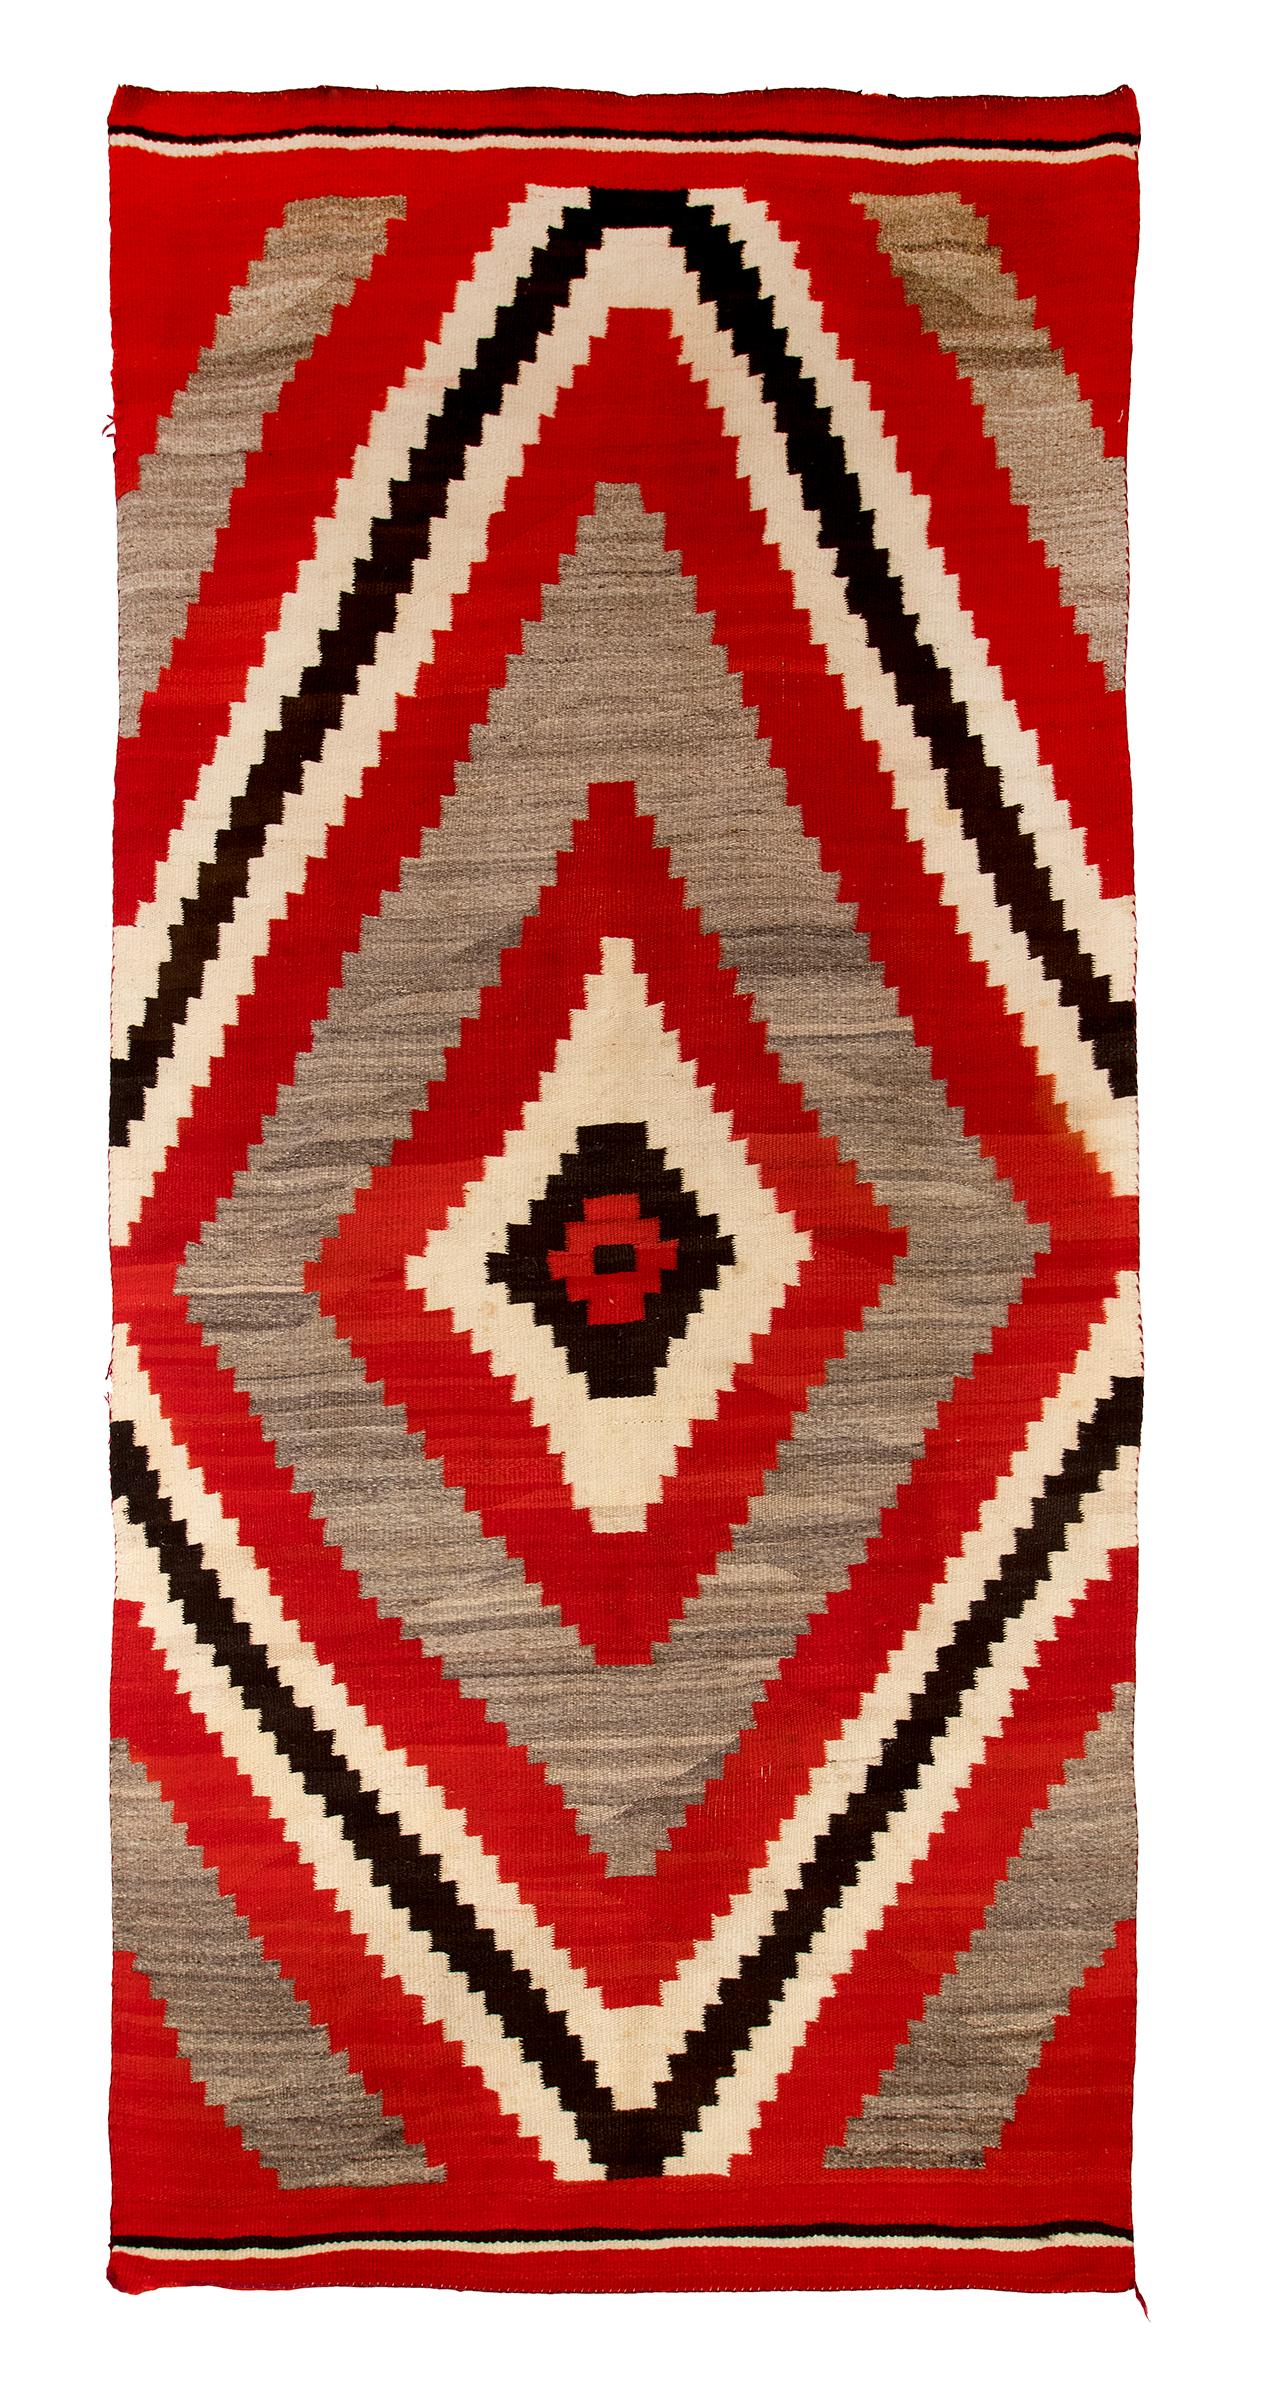 Vintage Navajo rug with a Ganado Trading Post design, circa 1900 - 1910. Woven of native hand spun wool in natural fleece colors of gray brown, ivory and brown black with aniline dyed red. Diamond pattern. This southwestern textile is well suited